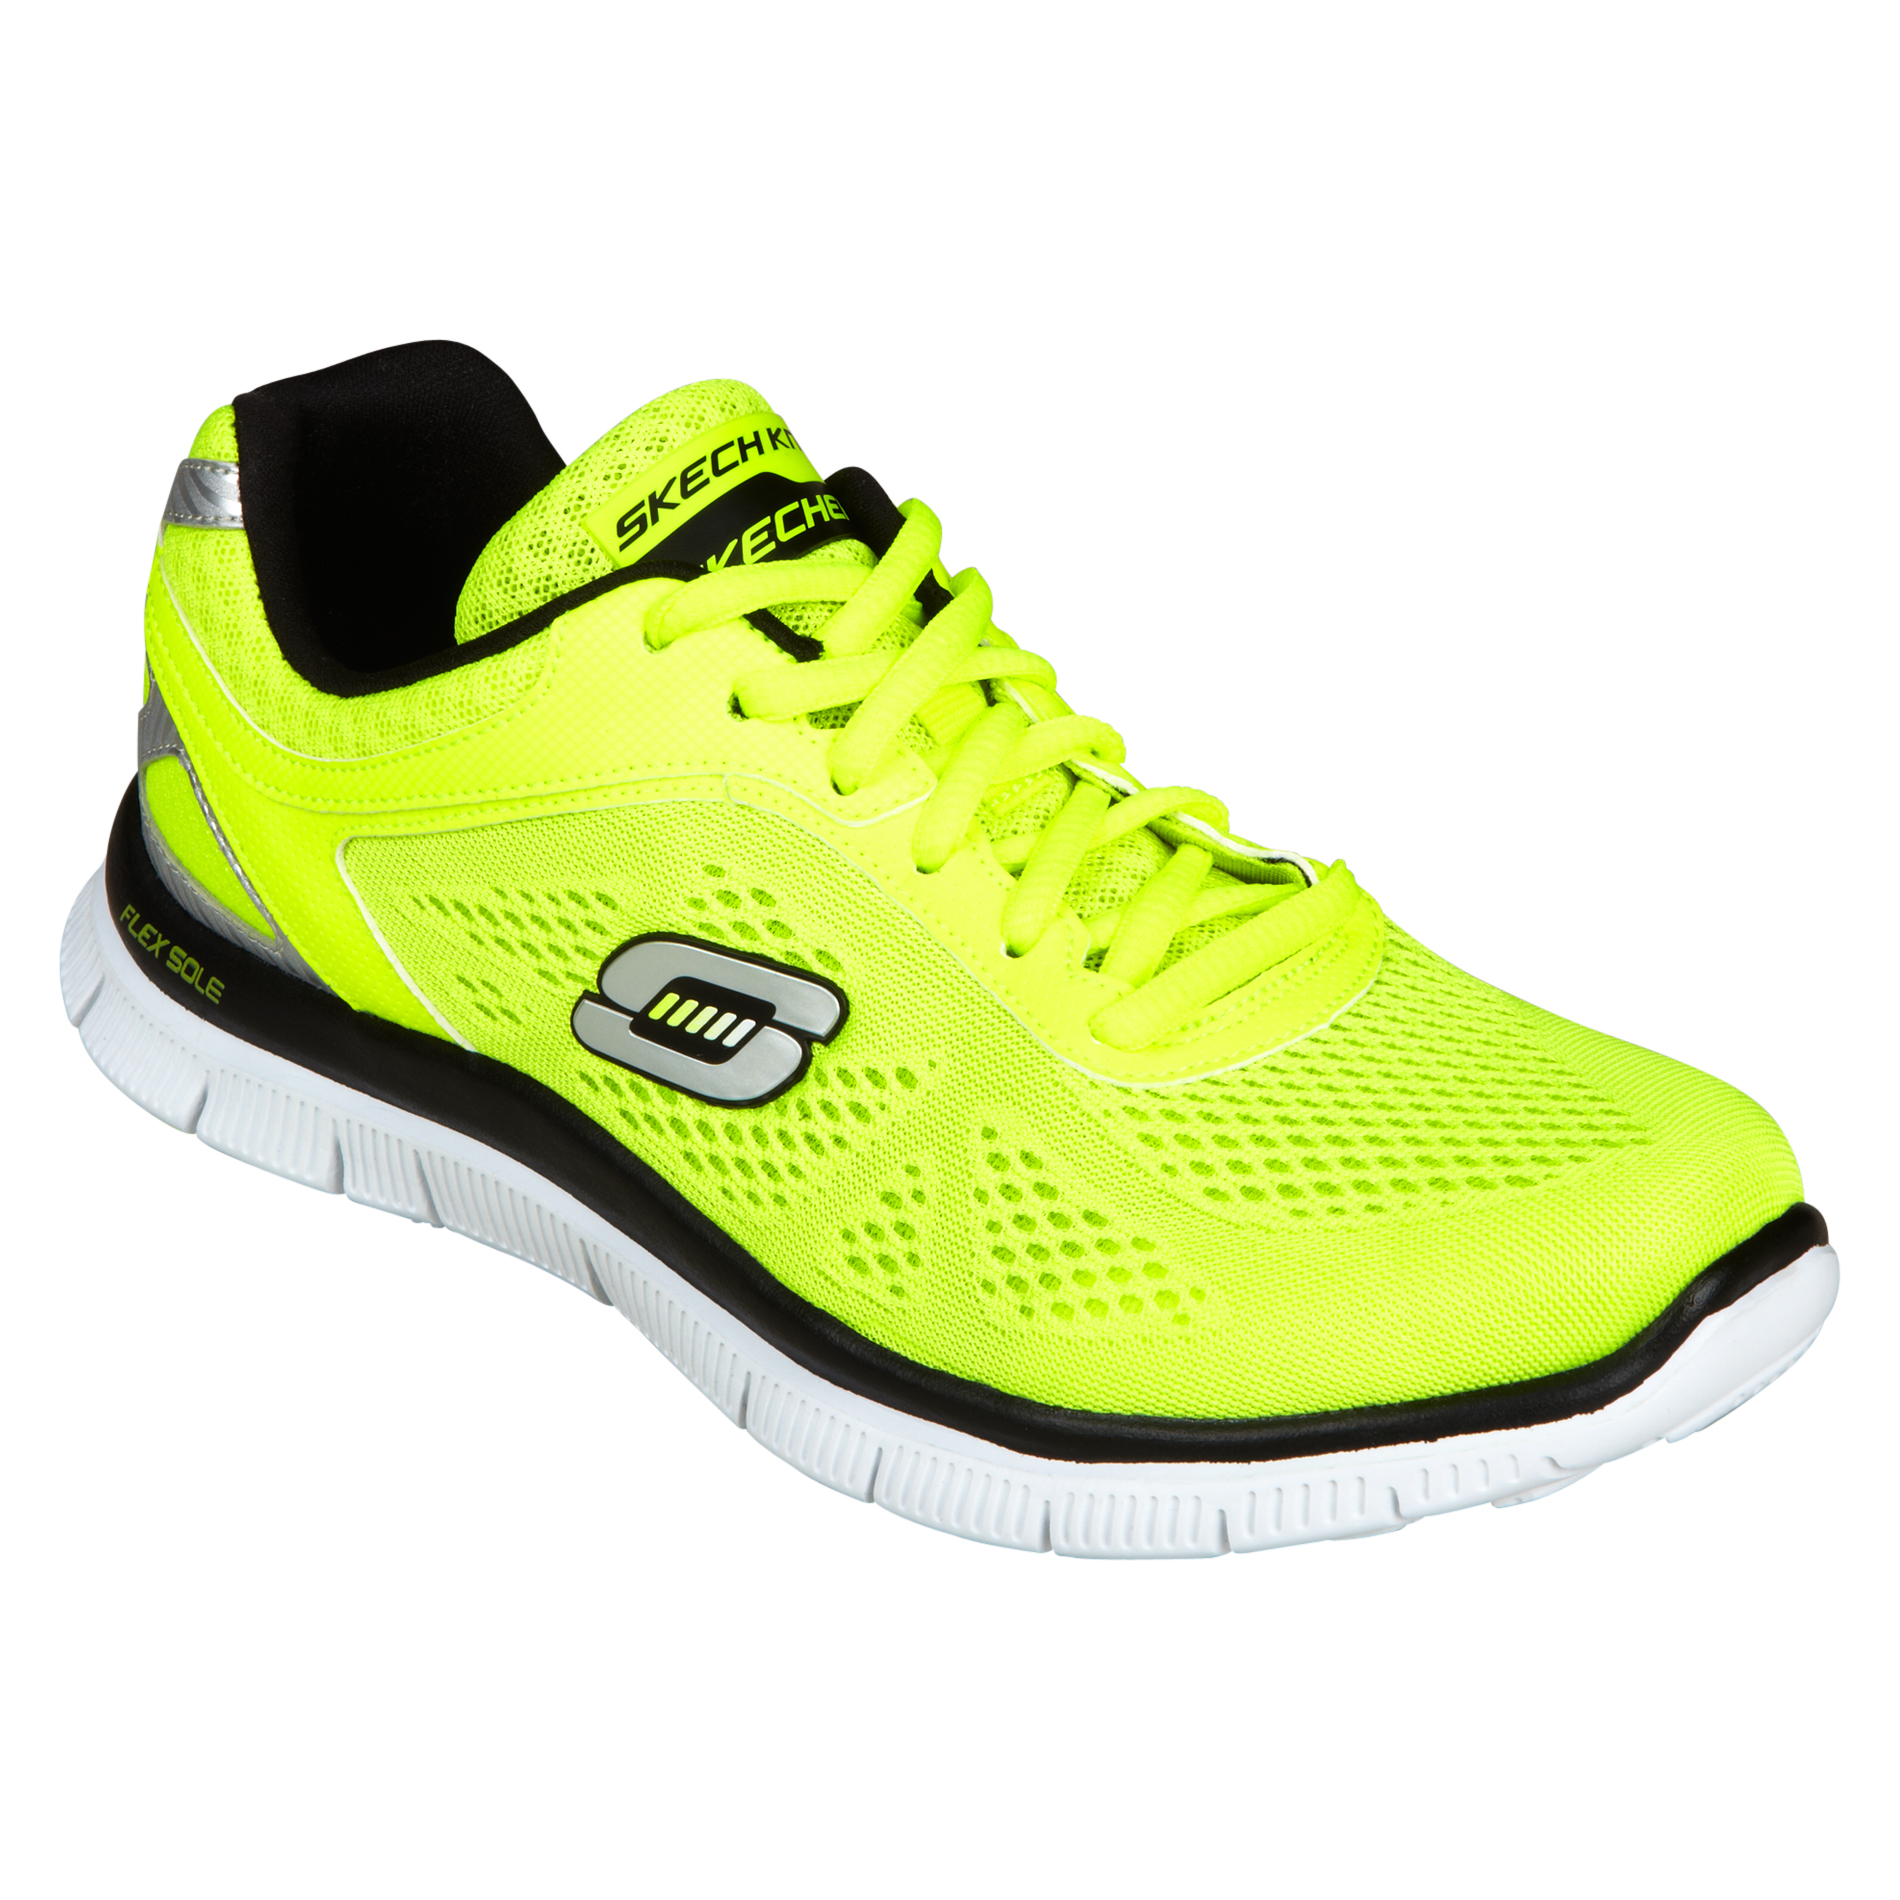 Skechers Women's Love Your Style Yellow Athletic Shoes